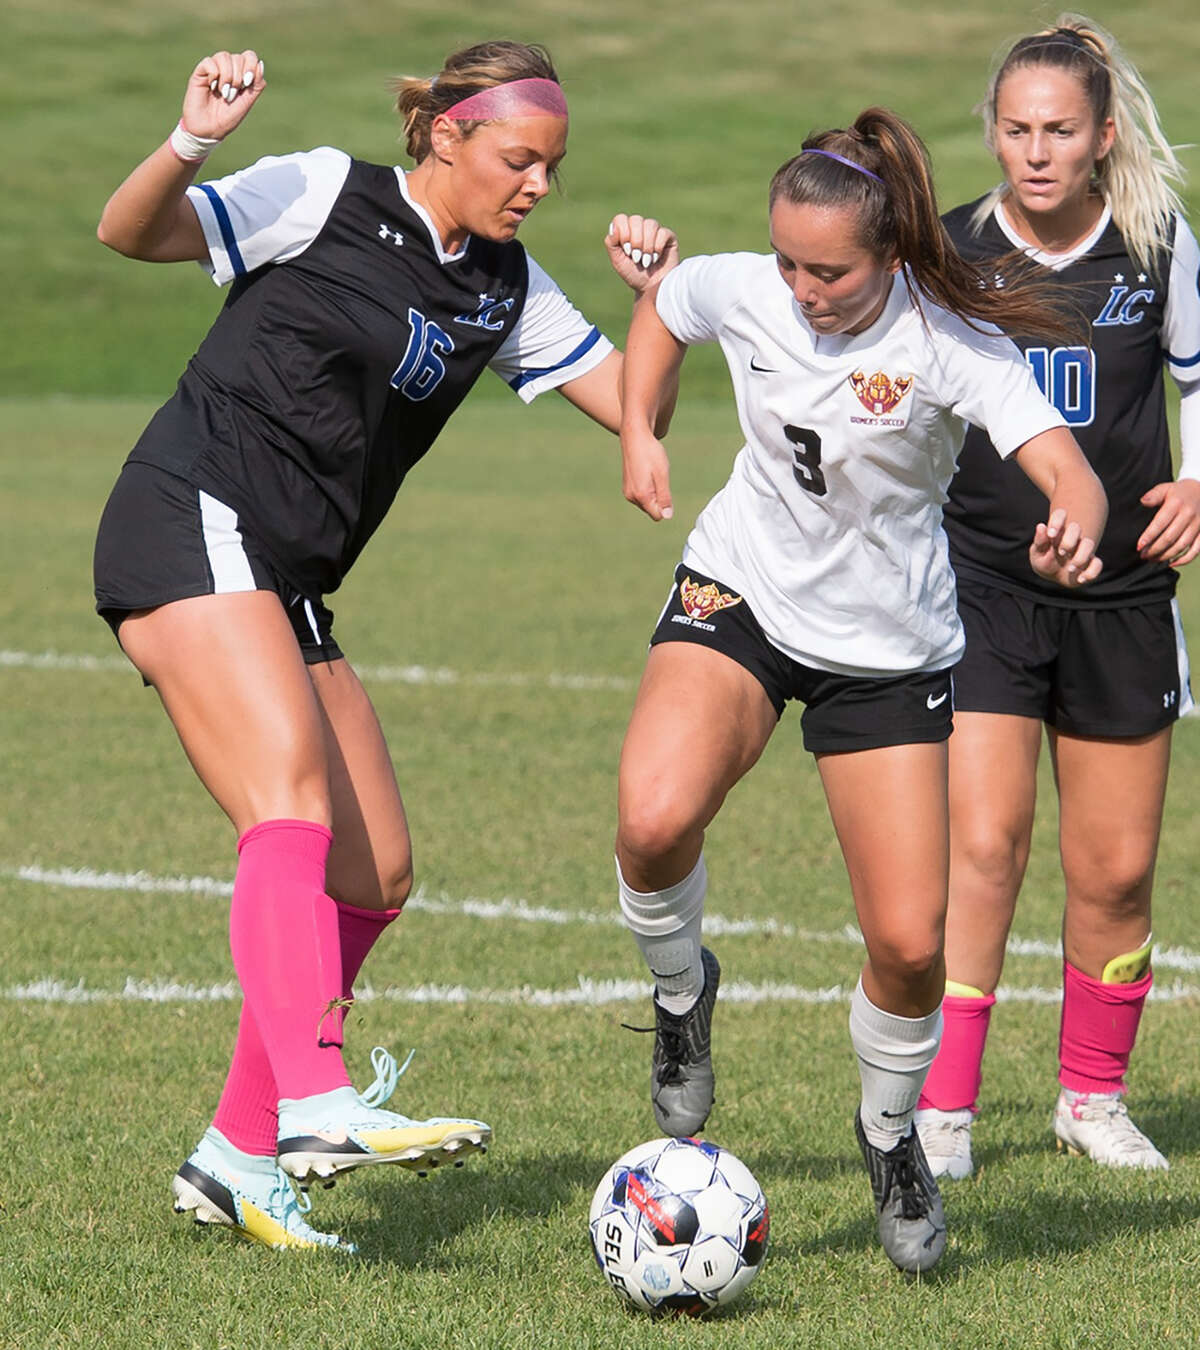 Shay Polson of Indian Hills (3) battles for the ball with LCCC's Maycee Gall (16) Thursday in Ottumwa, iowa. Also pictured is LCCC's Laura Douet (10).